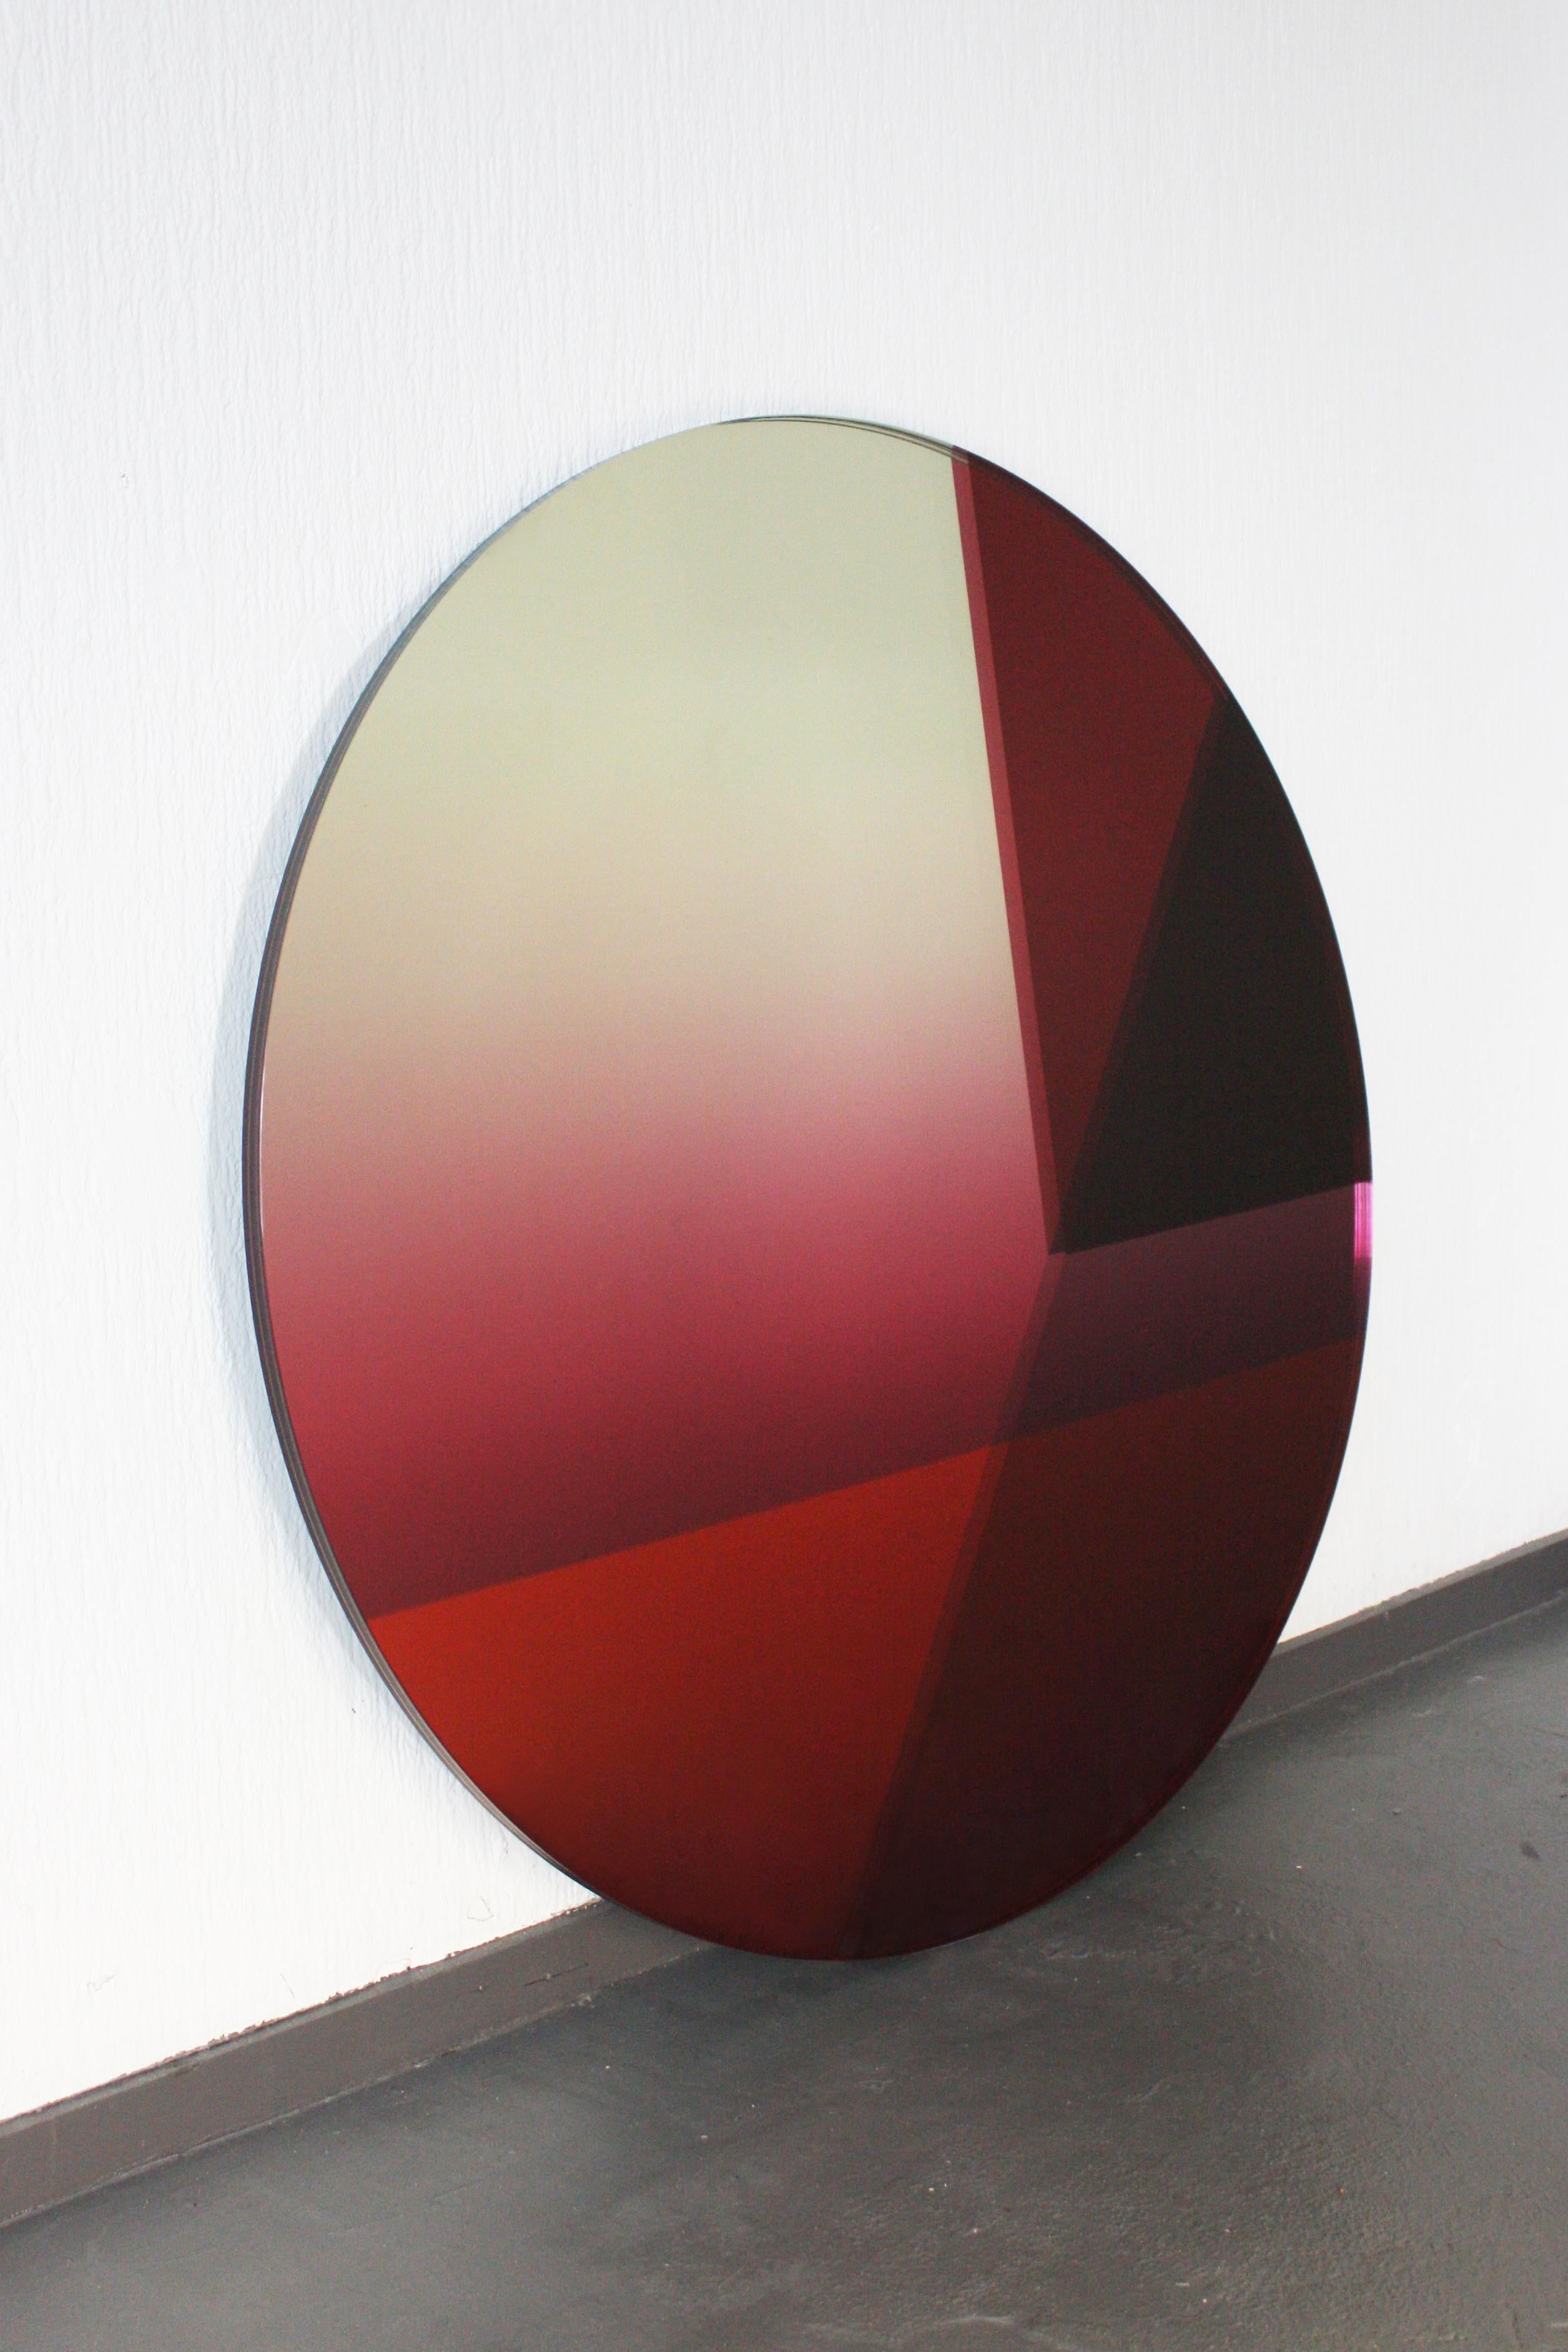  Contemporary Round Mirror 77 cm, Seeing Glass Series by Sabine Marcelis, Gold In New Condition For Sale In Copenhagen, DK